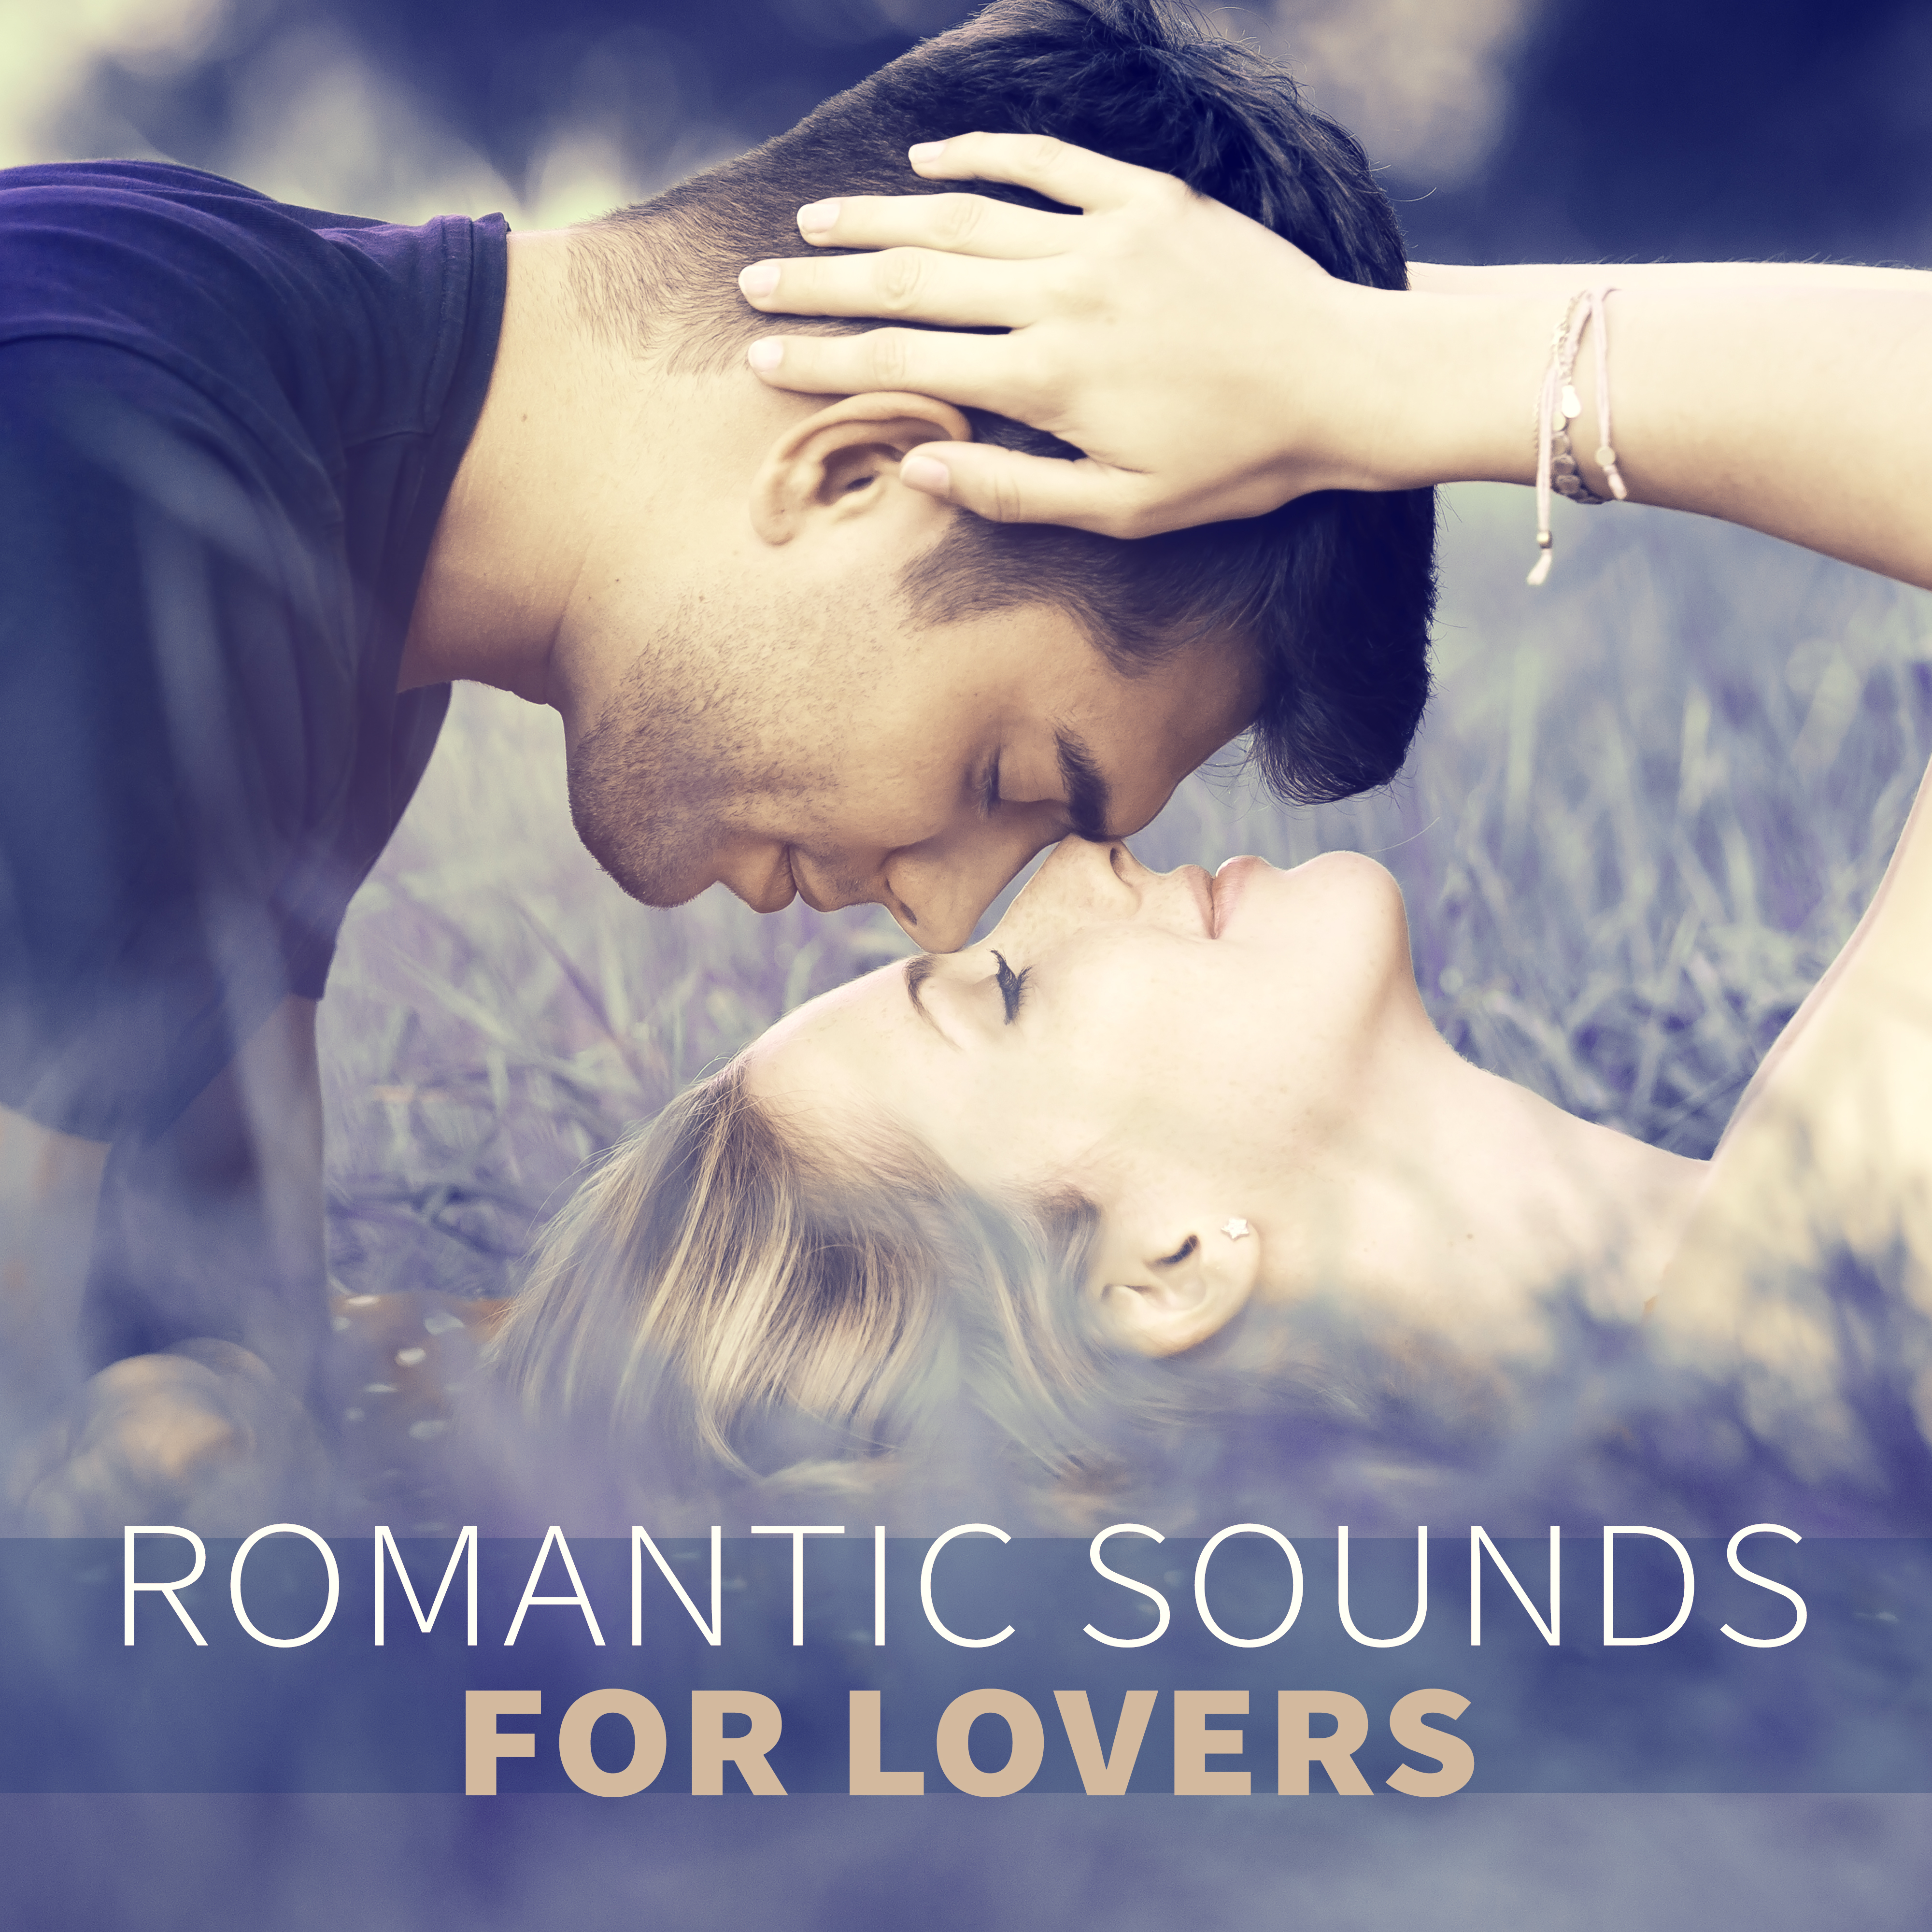 Romantic Sounds for Lovers  Smooth Jazz, Erotic Piano, Blue Jazz, Calm Sounds